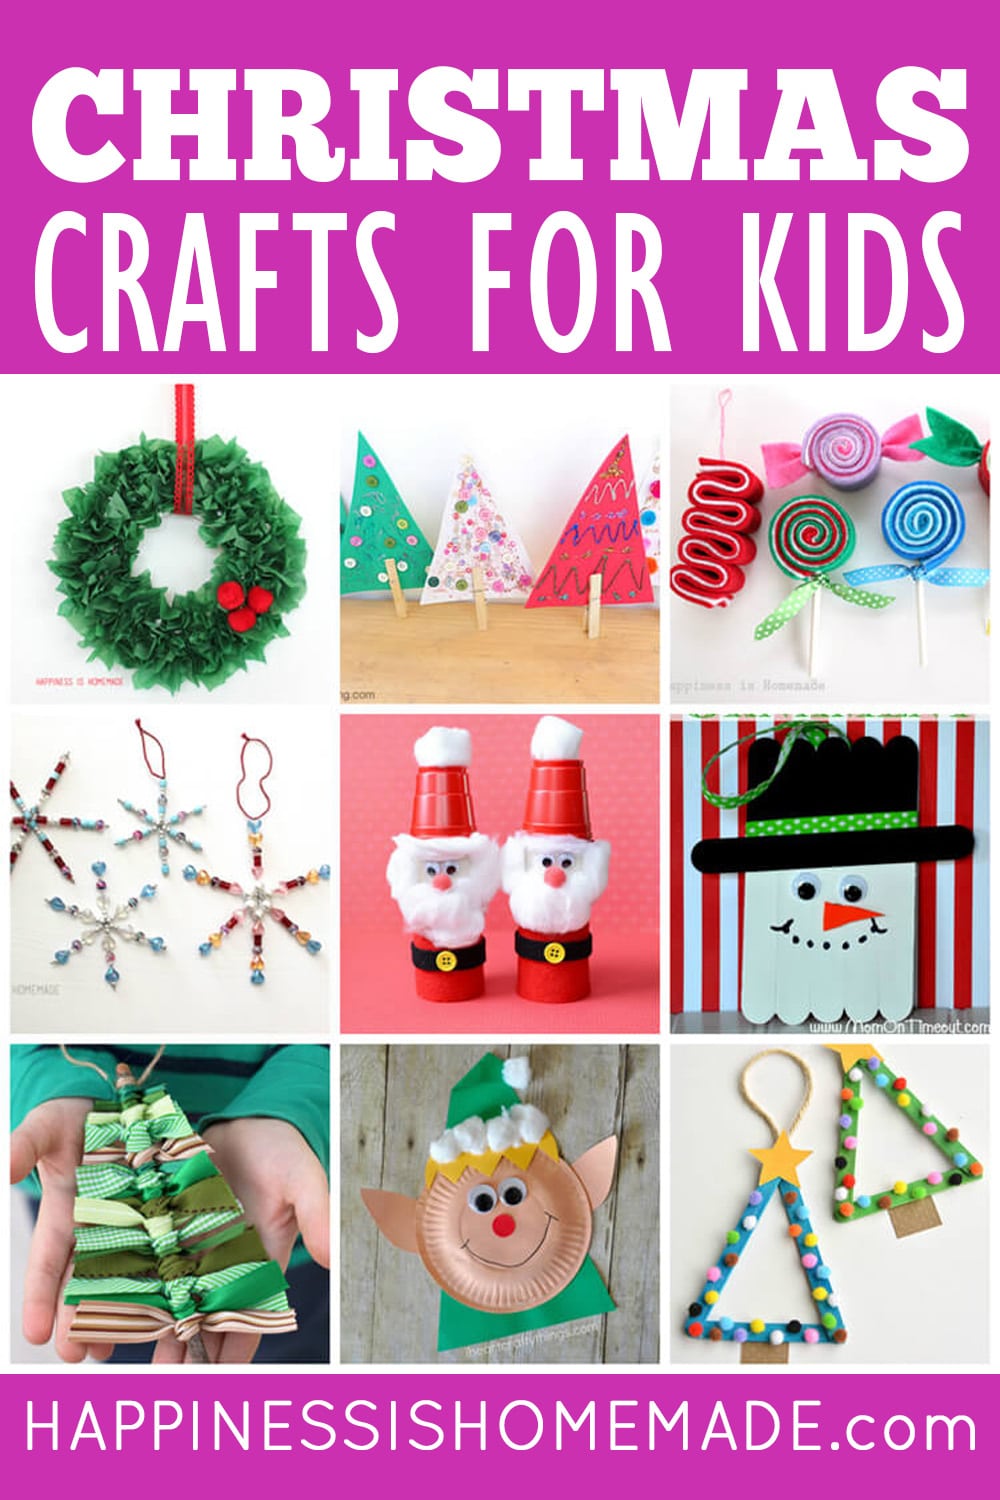 Collage of 9 Christmas kids crafts and "Christmas Crafts for Kids" text on magenta background